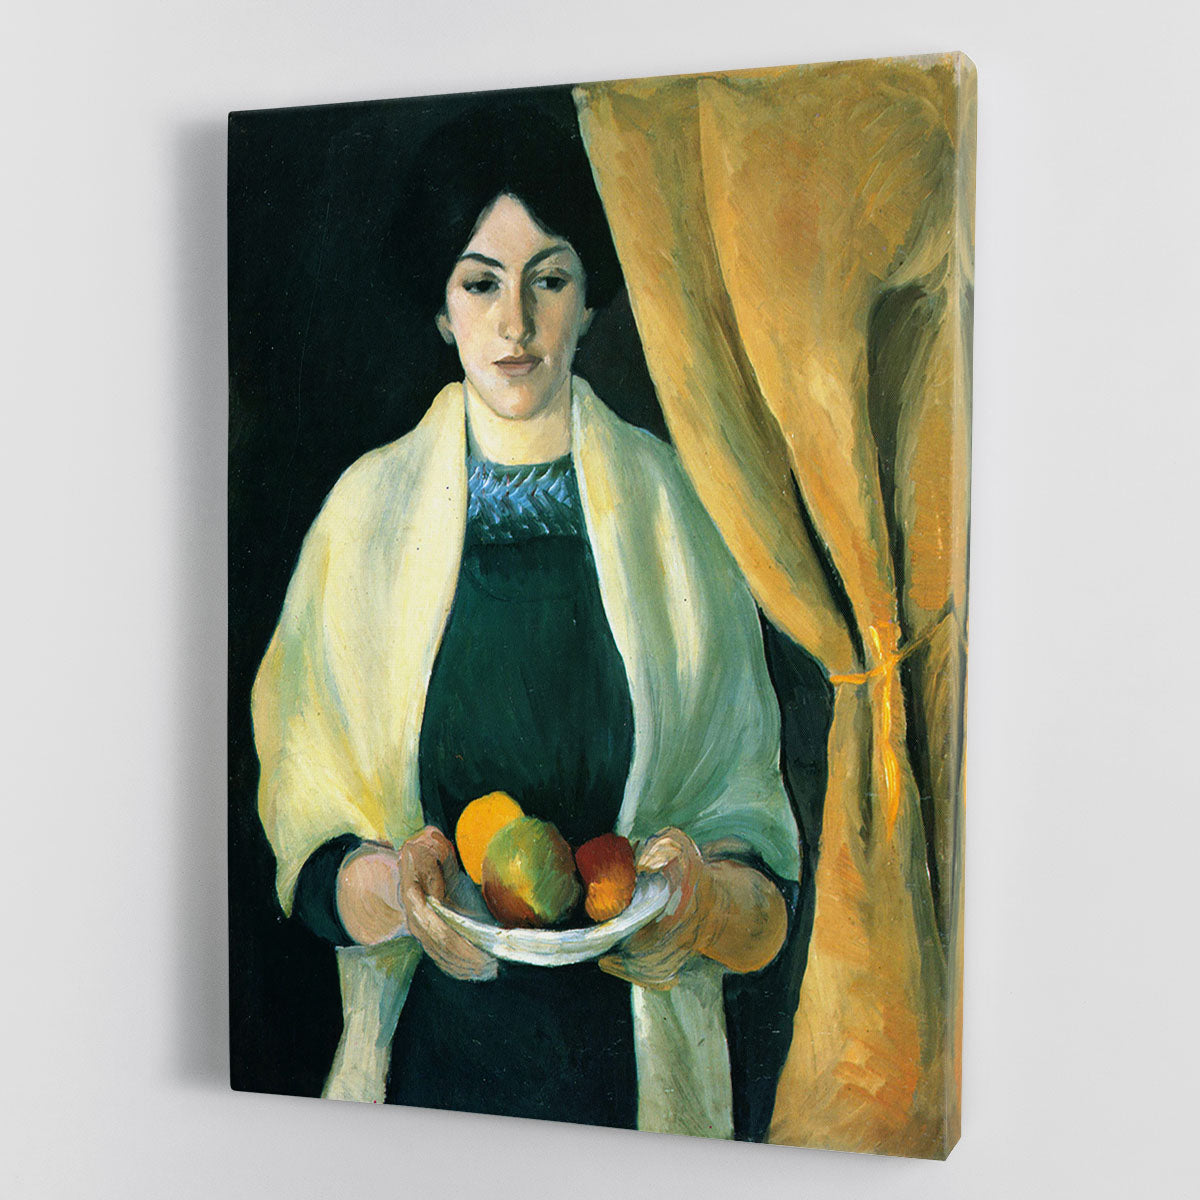 Portrait with apples portrait of the wife of the artist by Macke Canvas Print or Poster - Canvas Art Rocks - 1